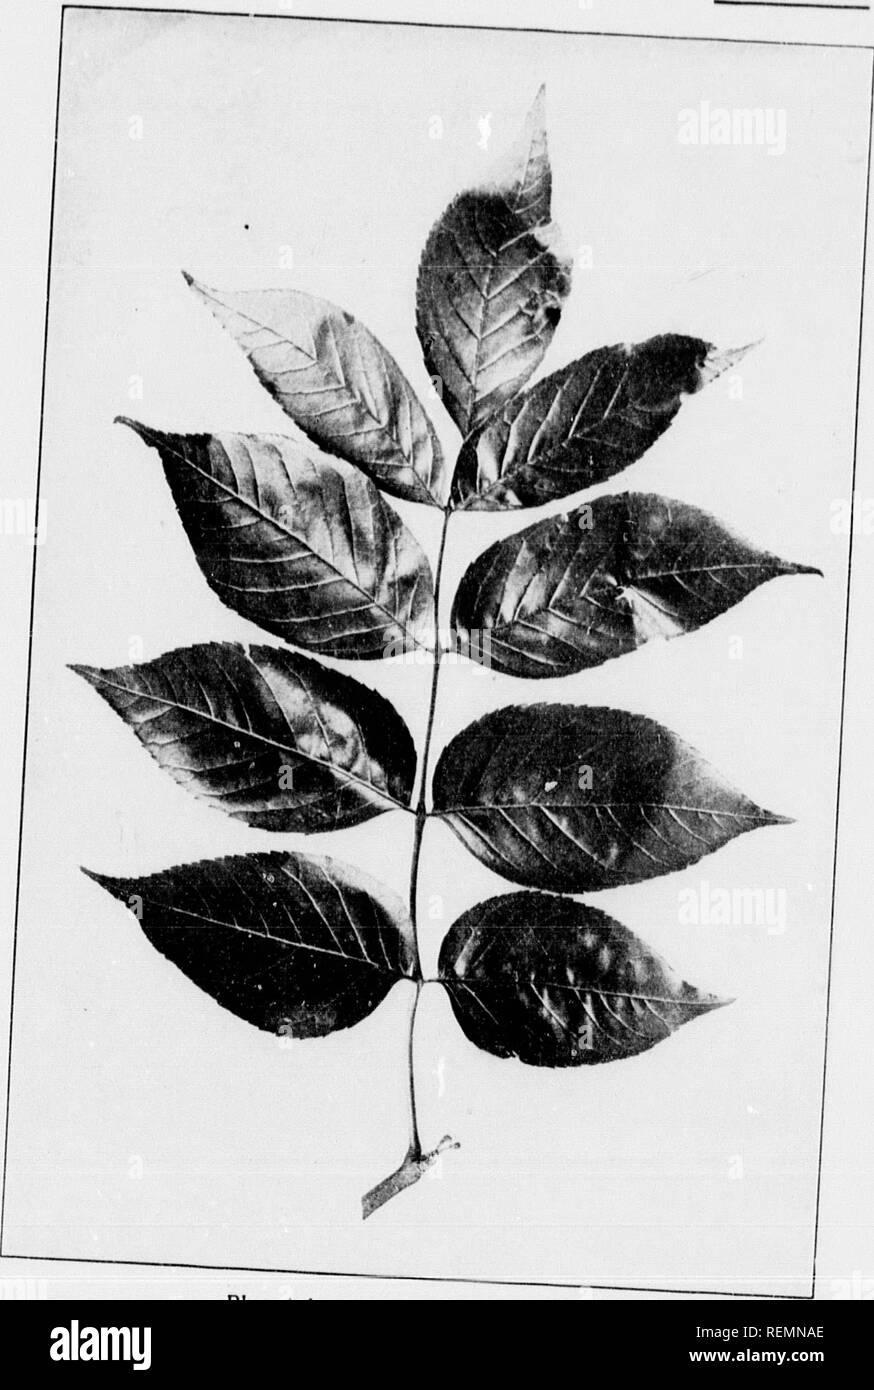 . Our native trees and how to identify them [microform] : a popular study of their habits and their peculiarities. Trees; Arbres. a lighter yel- iK'I't of cu.'ft., ; outor sc;iles and l)cc()inc gilt to twelve : iiiclies long, BLUE ASH Flower of Blue Ash, fraxi- IIHi qiiiidiiiif guliUa. oblong, ob- elled ; style natic lobes. miclcs, lin- , one-fourth airrounding lany-r.'iyed. i elliptical. ;hat group the Miss- nni so lit h- souri and ;ssee and igli Iowa 'rkansas. ulrori re- i-p it. Its II flourish iar stout,. Blue Ash. Fraxnnn quadrangulata. Leaves 8' ,o,y long. LeaHets 3' to 5'long.. Please n Stock Photo